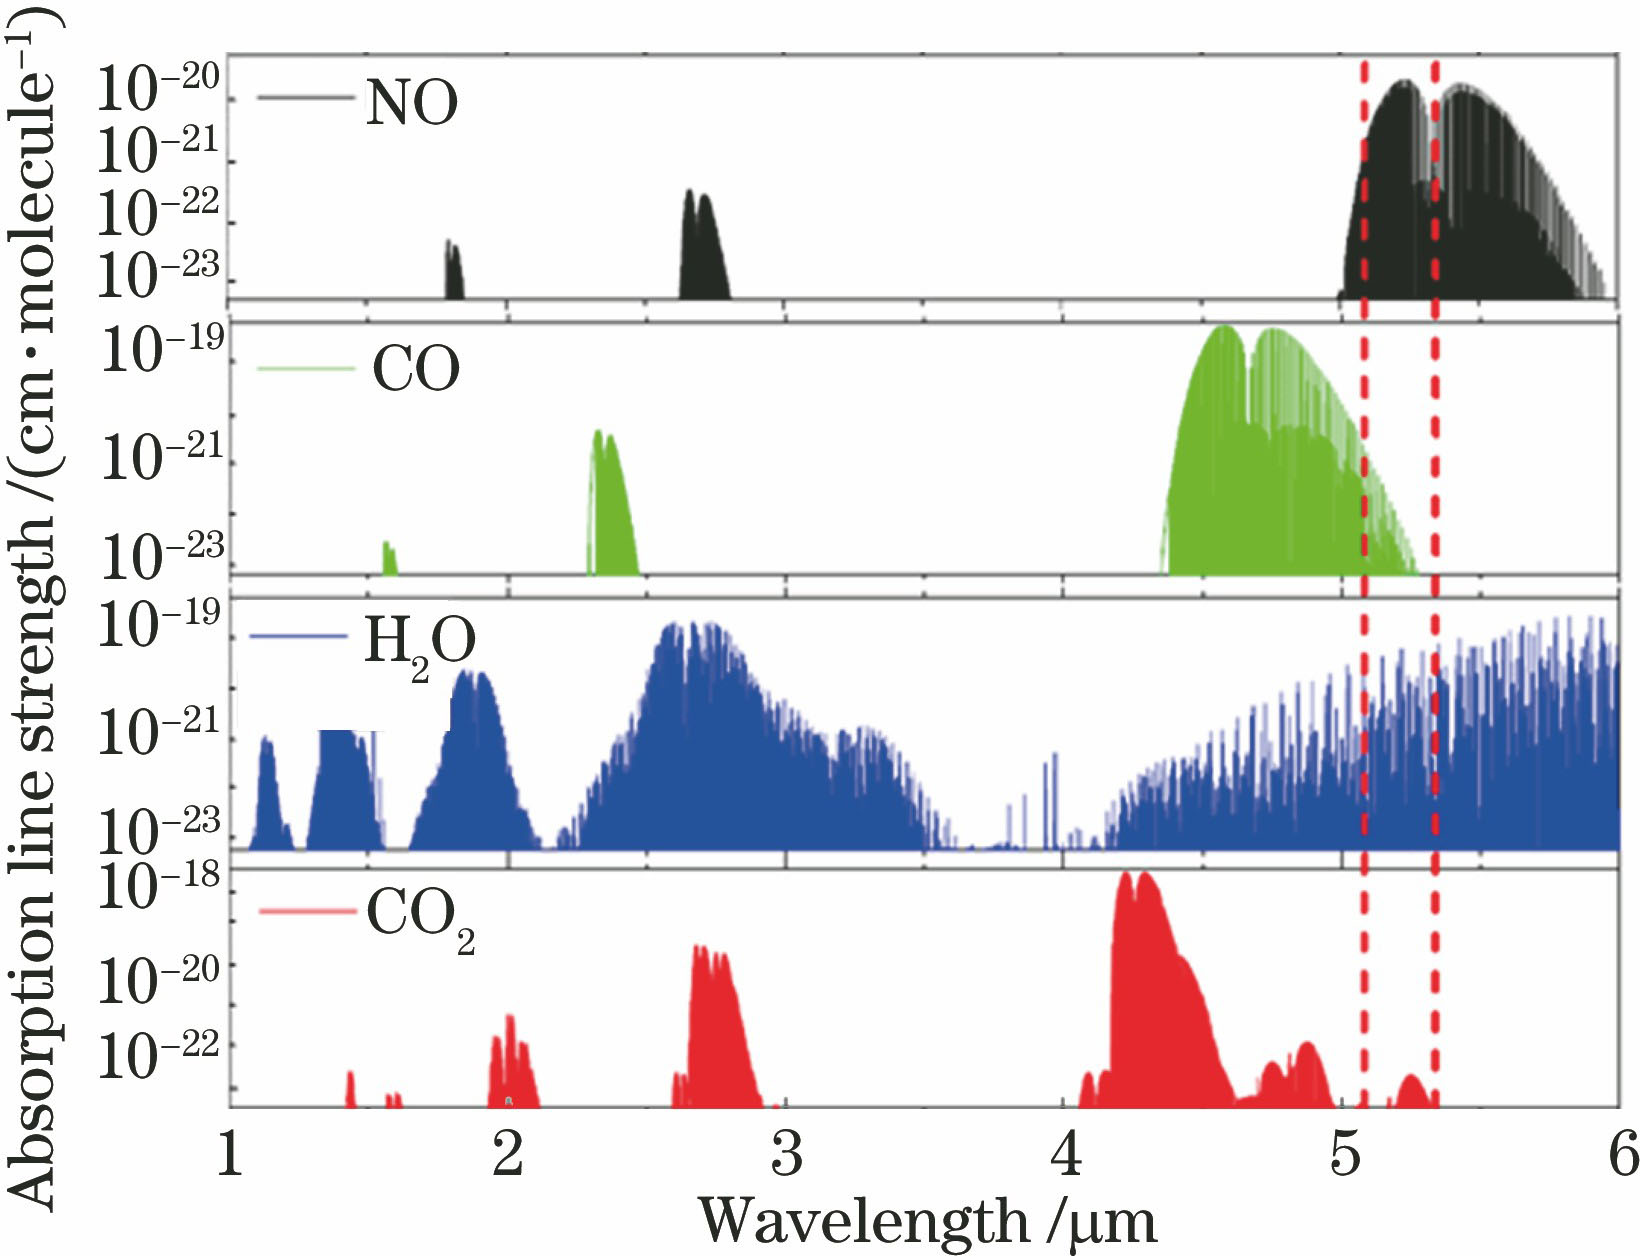 Absorption line strengths of NO, CO, H2O, and CO2 with wavelength from 1 μm to 6 μm at 600 K